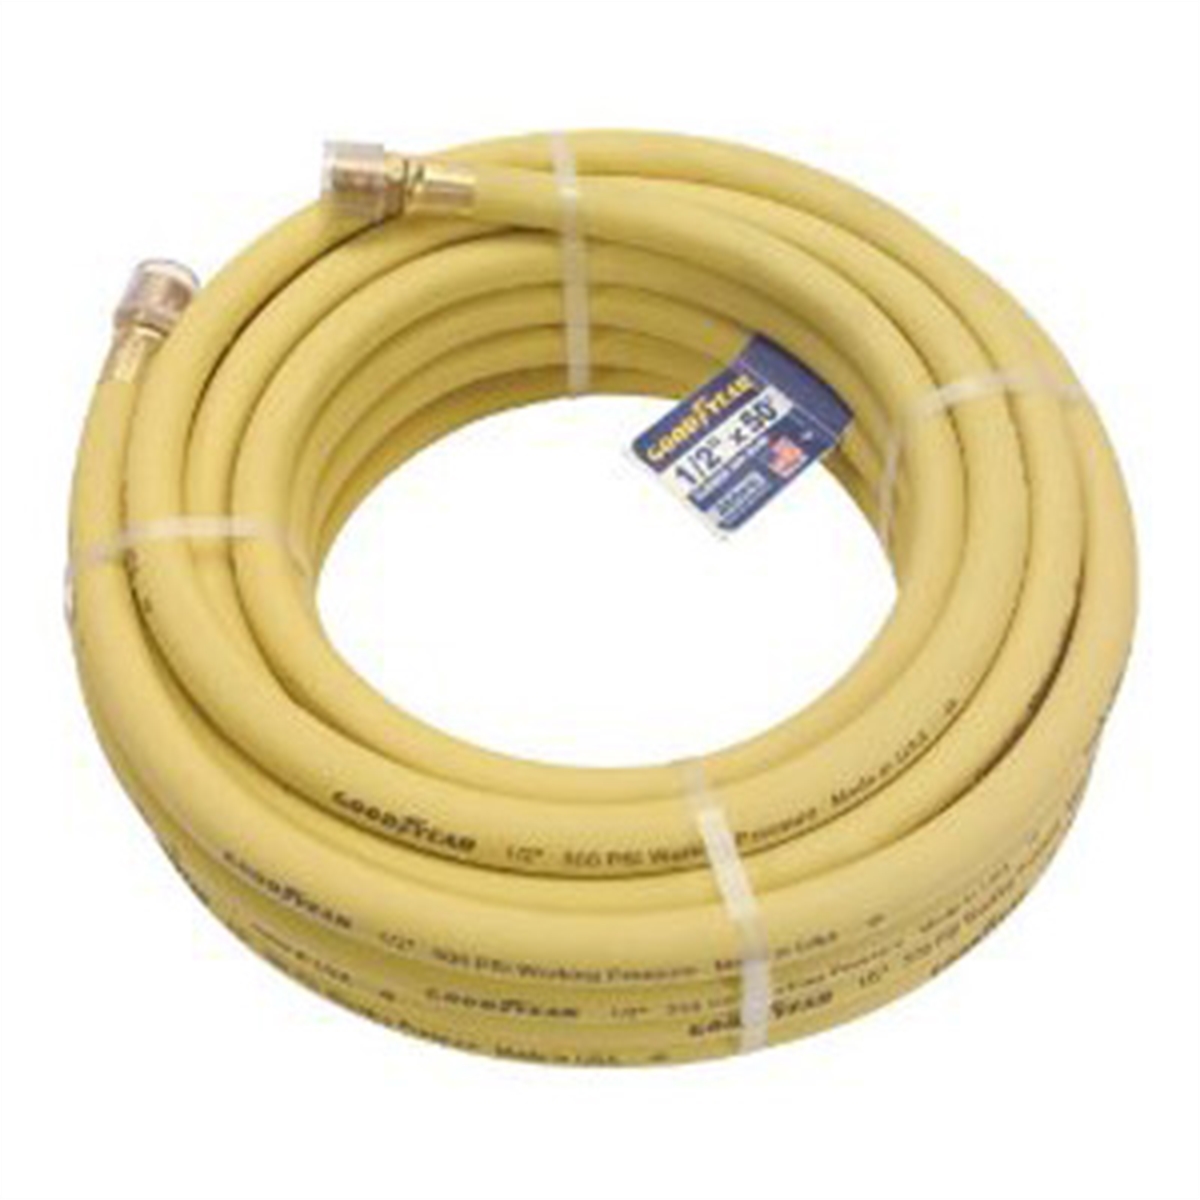 by 6-Foot 250 PSI  Rubber Lead-In Air Hose with 1/4-Inch MPT Ends Michigan Industrial Tools TEKTON 46333 3/8-Inch I.D 